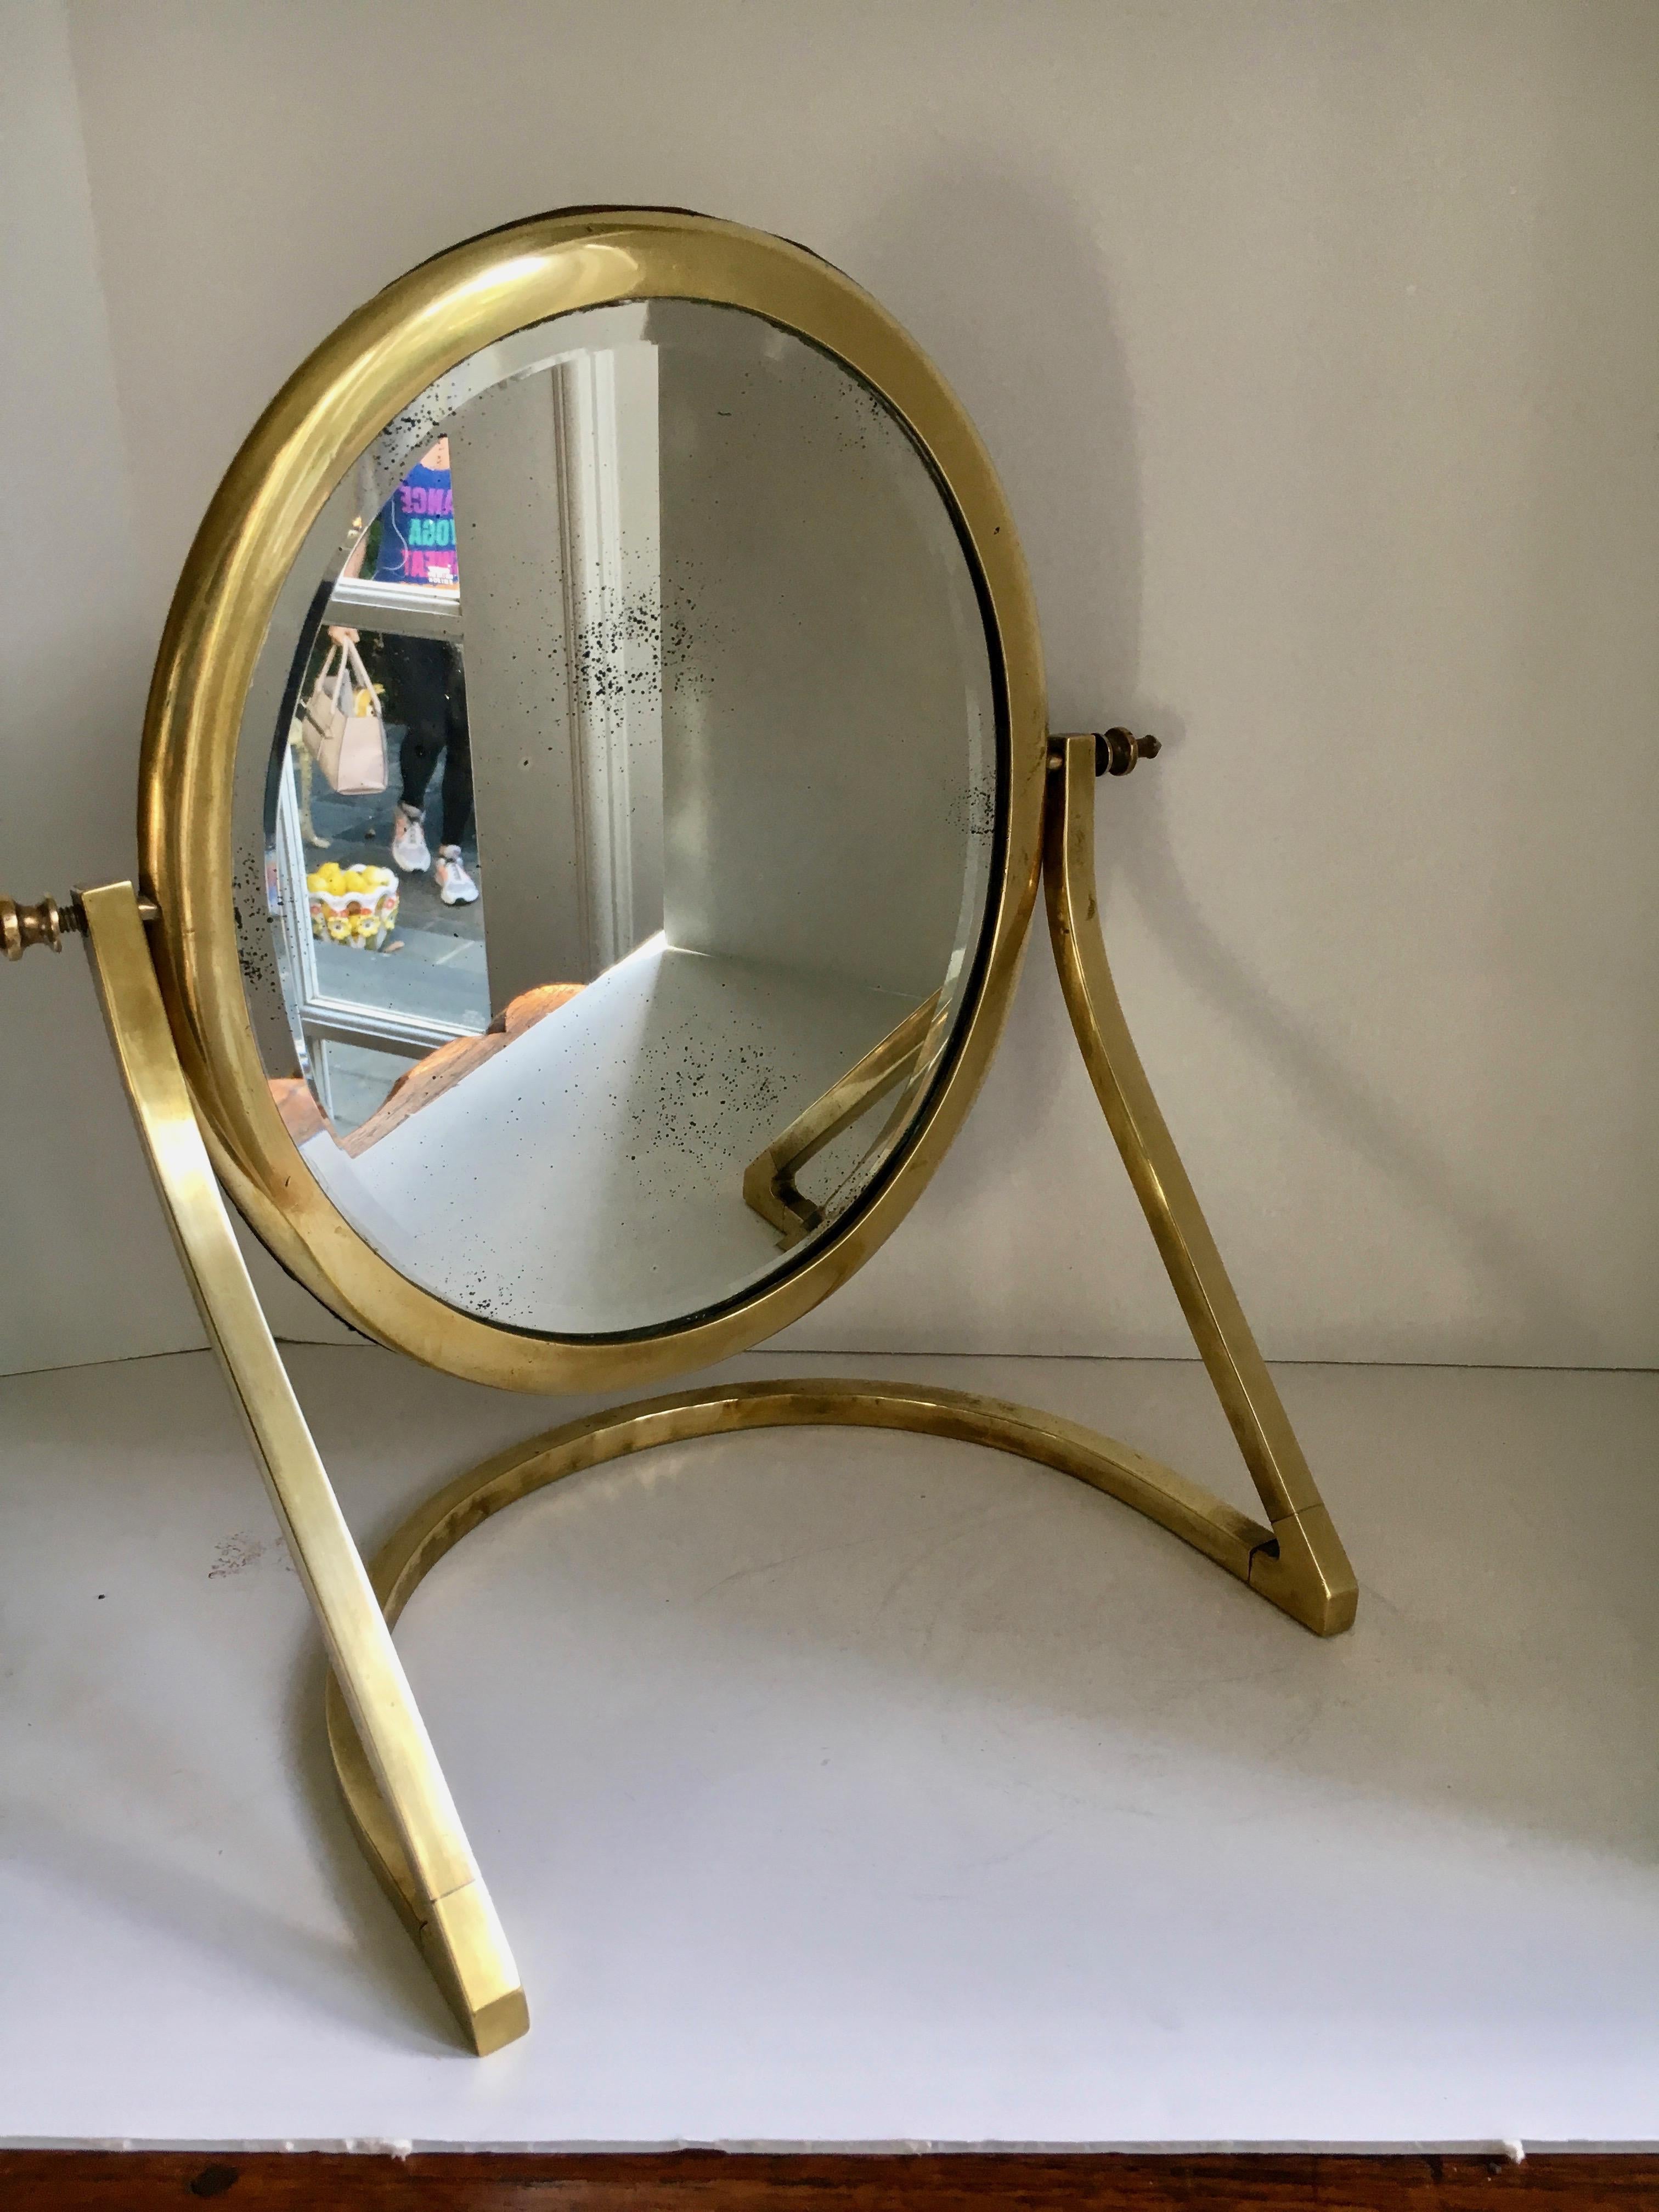 A beautiful mirror on unique stand - lovely for a ladies dressing table or handsome as for a man's closet or dressing area. The mirror is beautifully patinated. The brass finials on either side of mirror are wonderful and the rear screw closures are